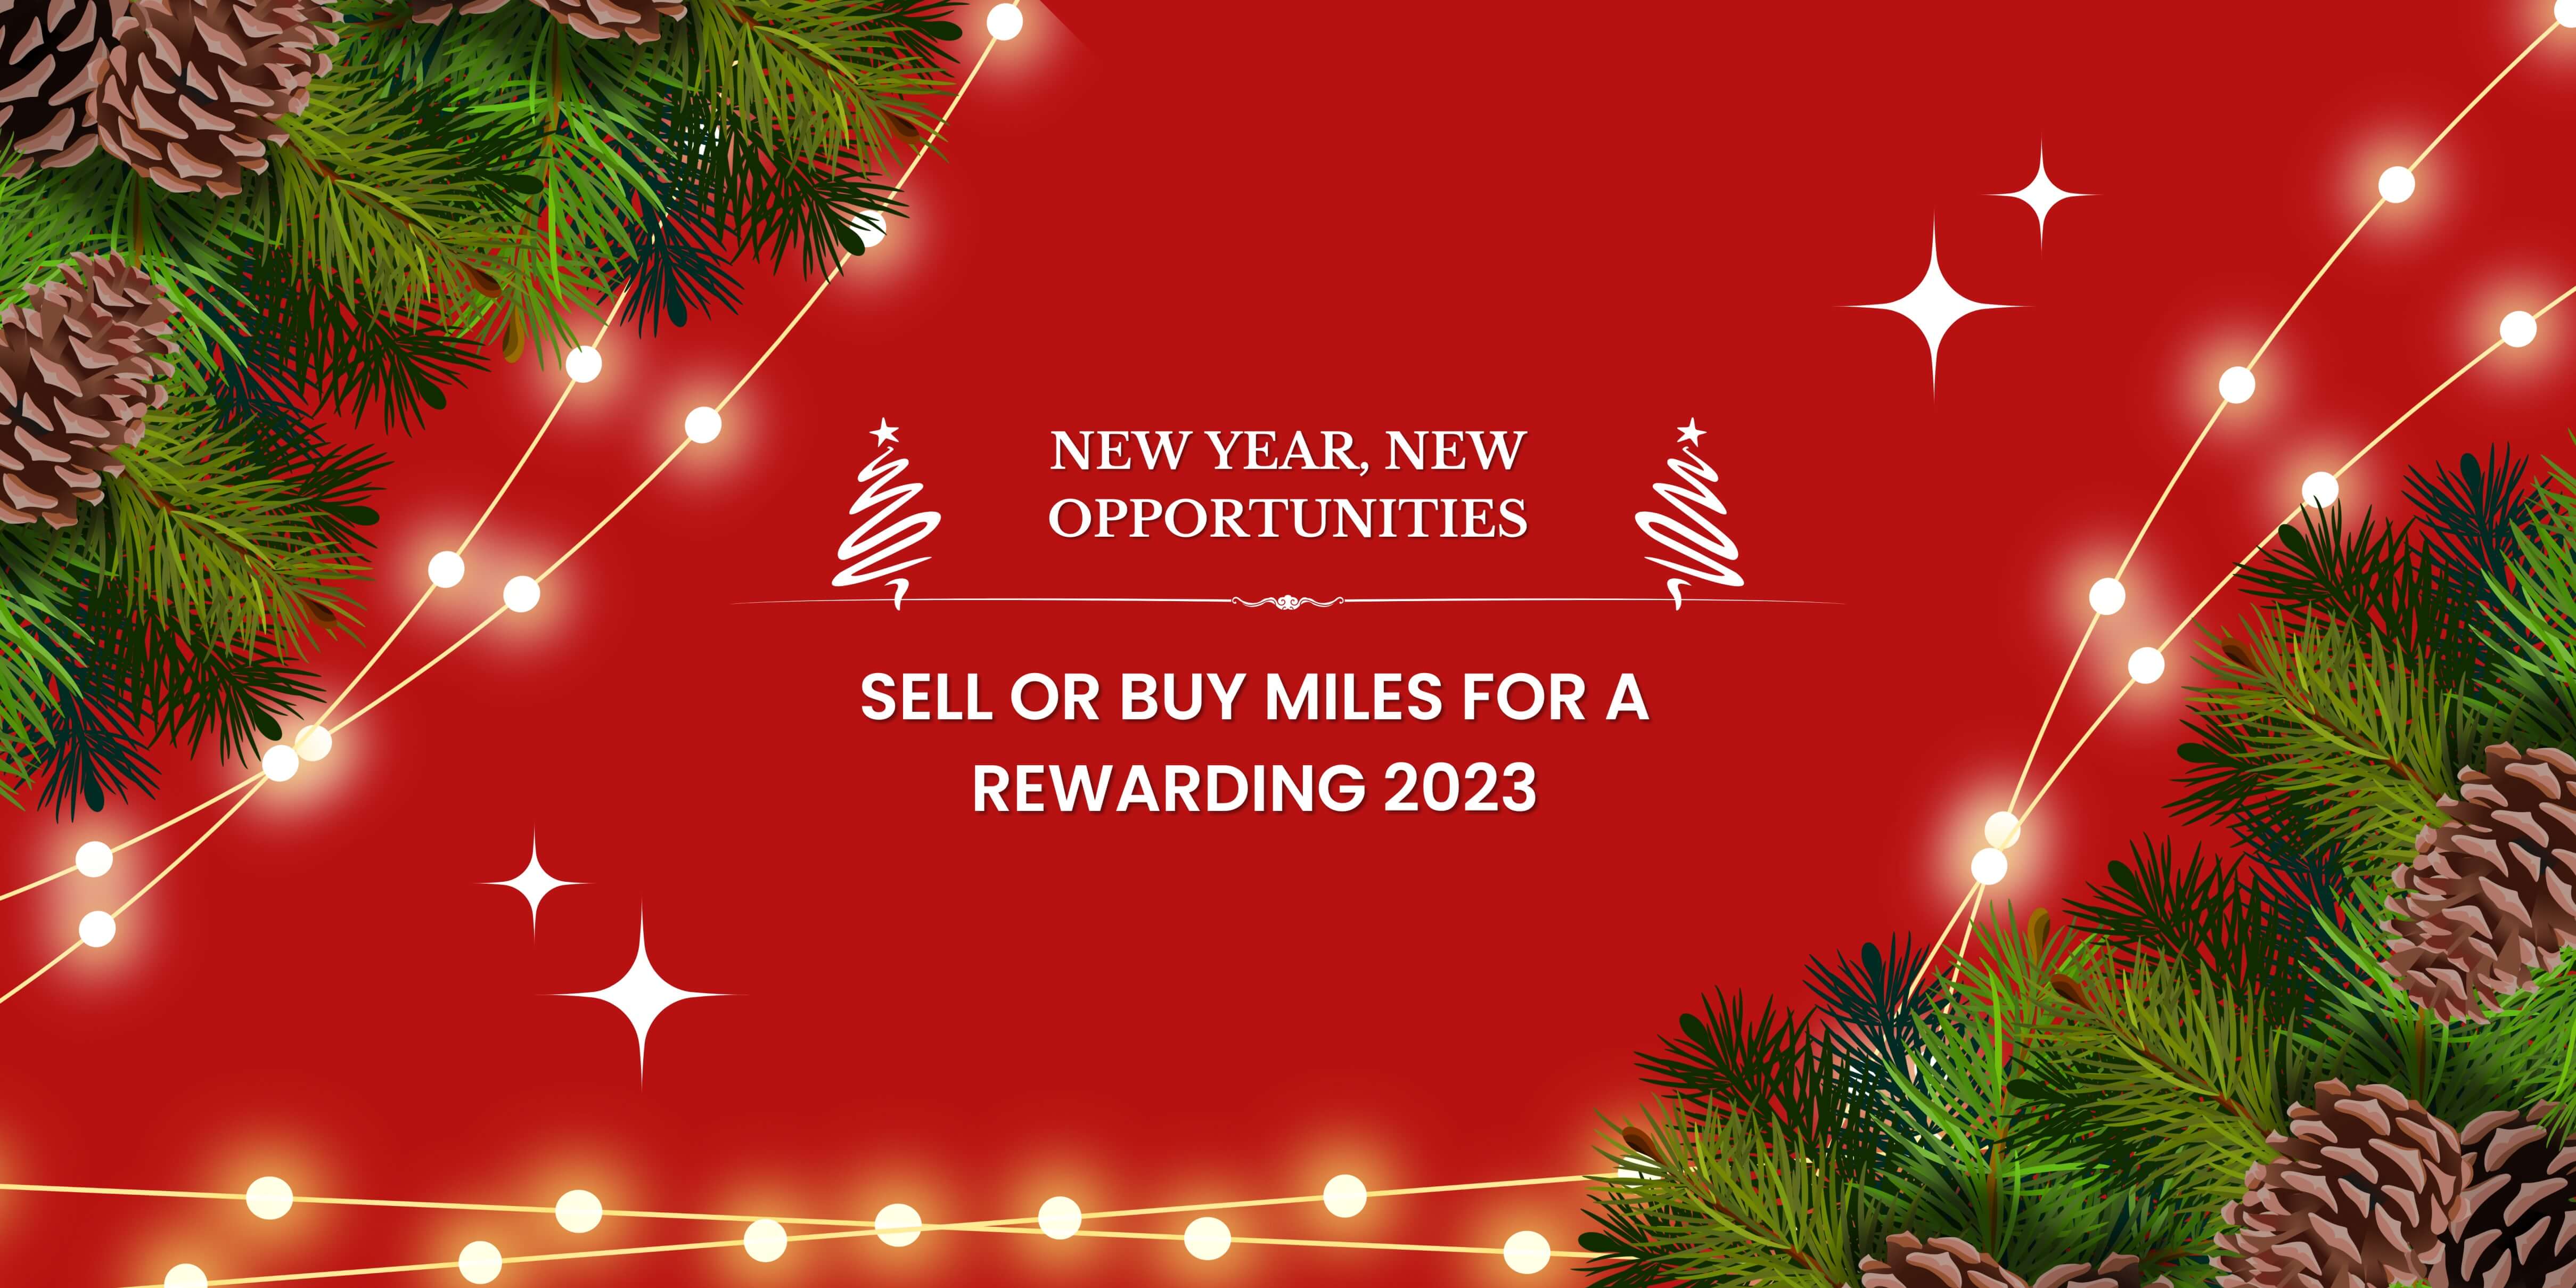 New Year, New Opportunities: Sell or Buy Miles for a Rewarding 2023